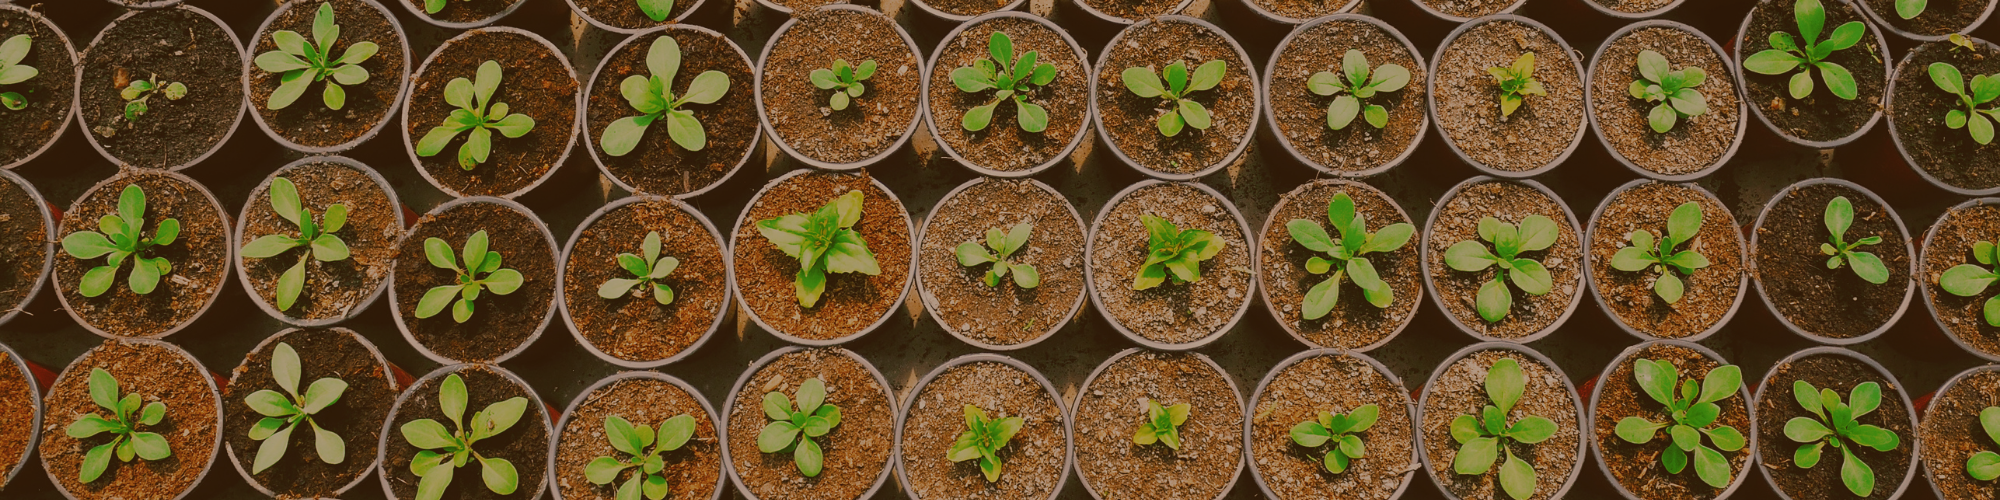 rows of sprouting plants in little pots